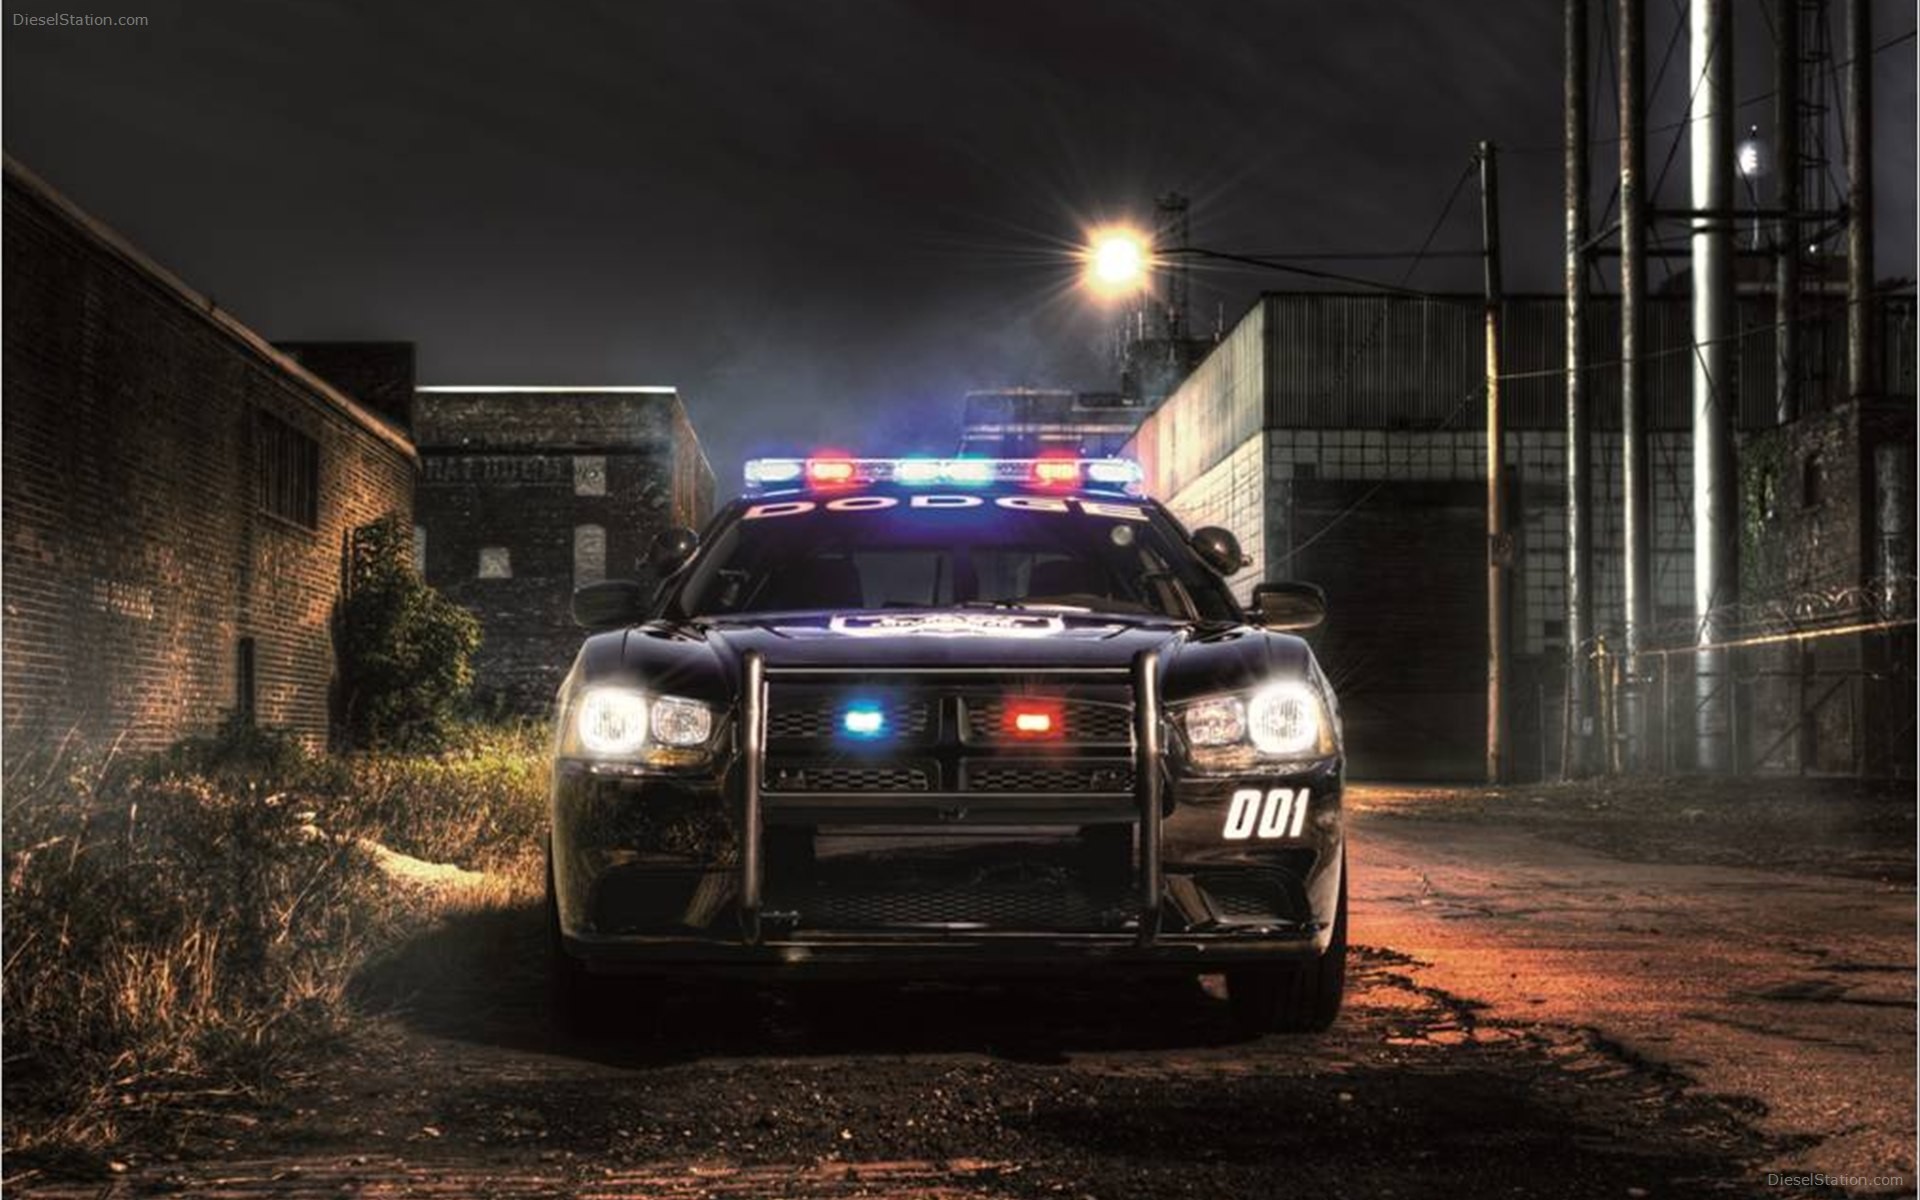 1920x1200 2048x1152 Wallpapers Tagged With POLICE POLICE Car Wallpapers, Images